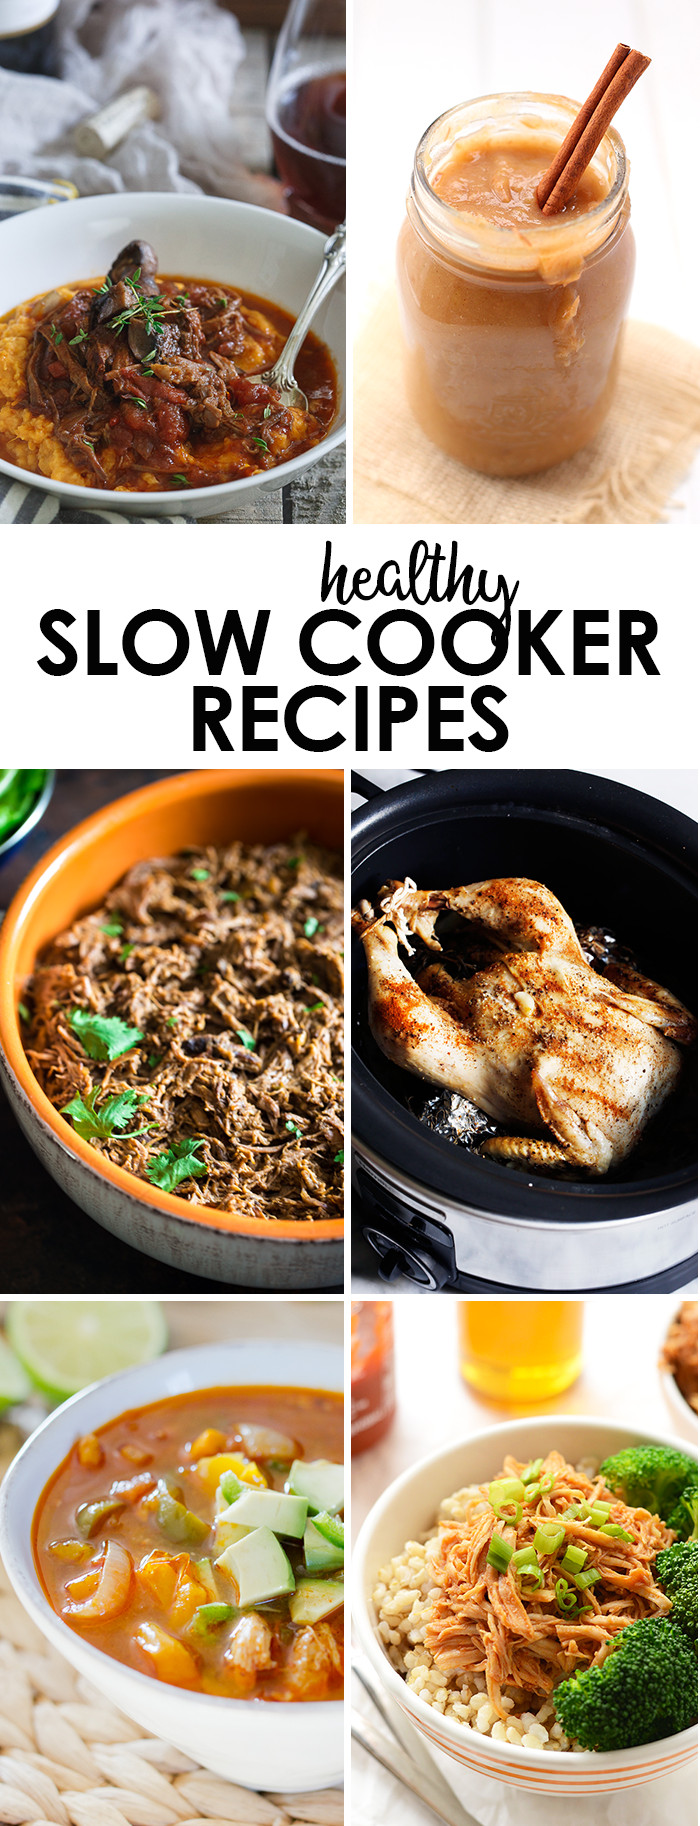 Healthy Chicken Slow Cooker Recipes
 5 Ingre nt Honey Sriracha Slow Cooker Chicken Fit